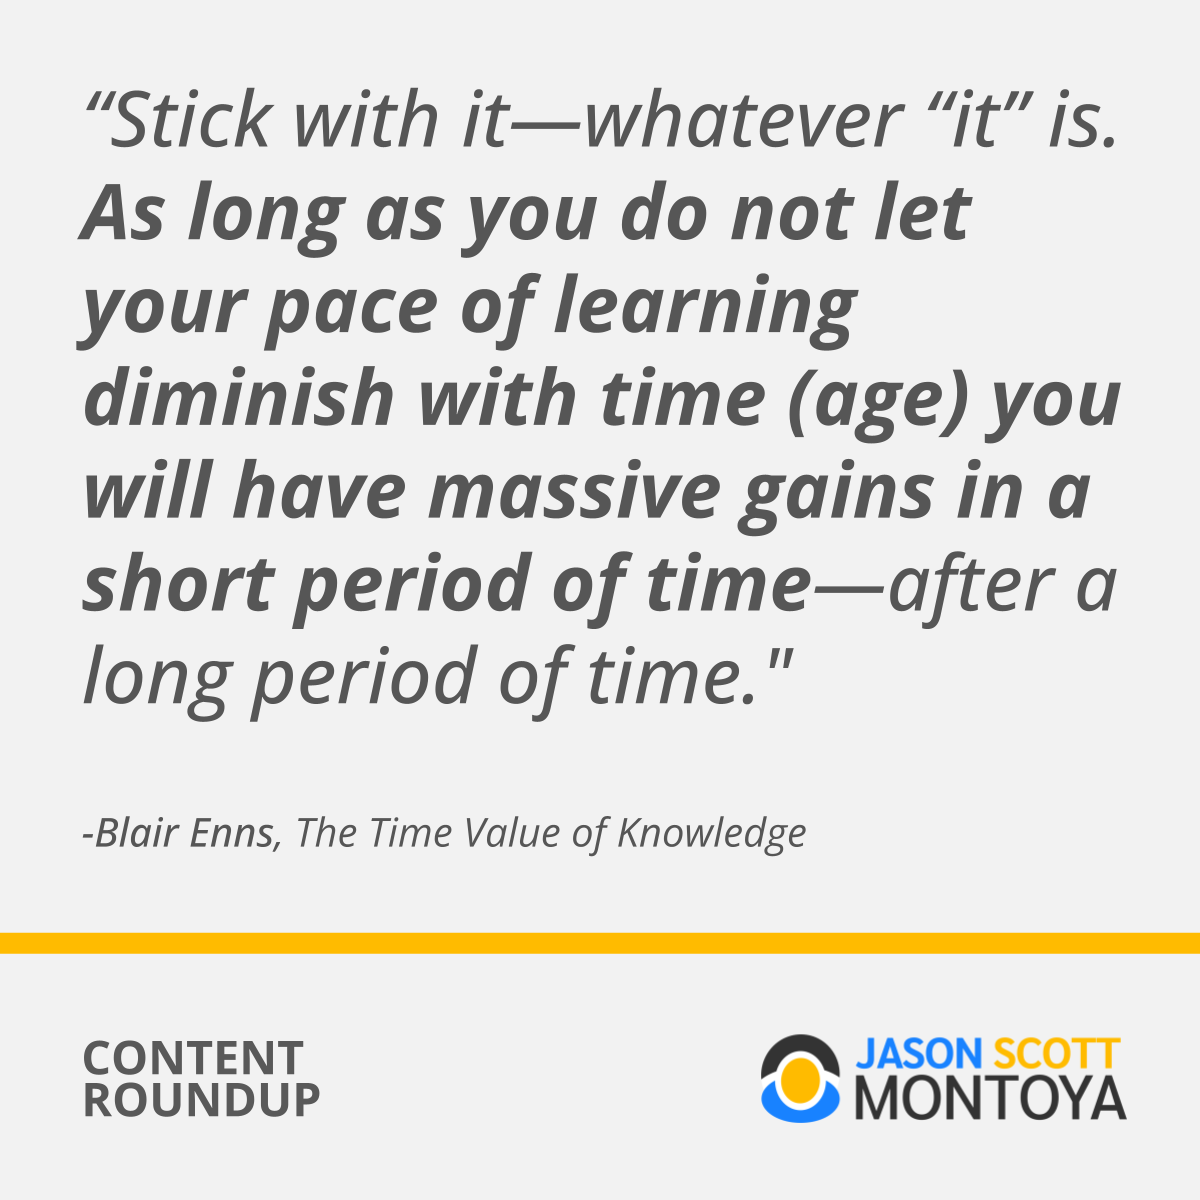 "Stick with it—whatever “it” is. As long as you do not let your pace of learning diminish with time (age) you will have massive gains in a short period of time—after a long period of time." - Blair Enns